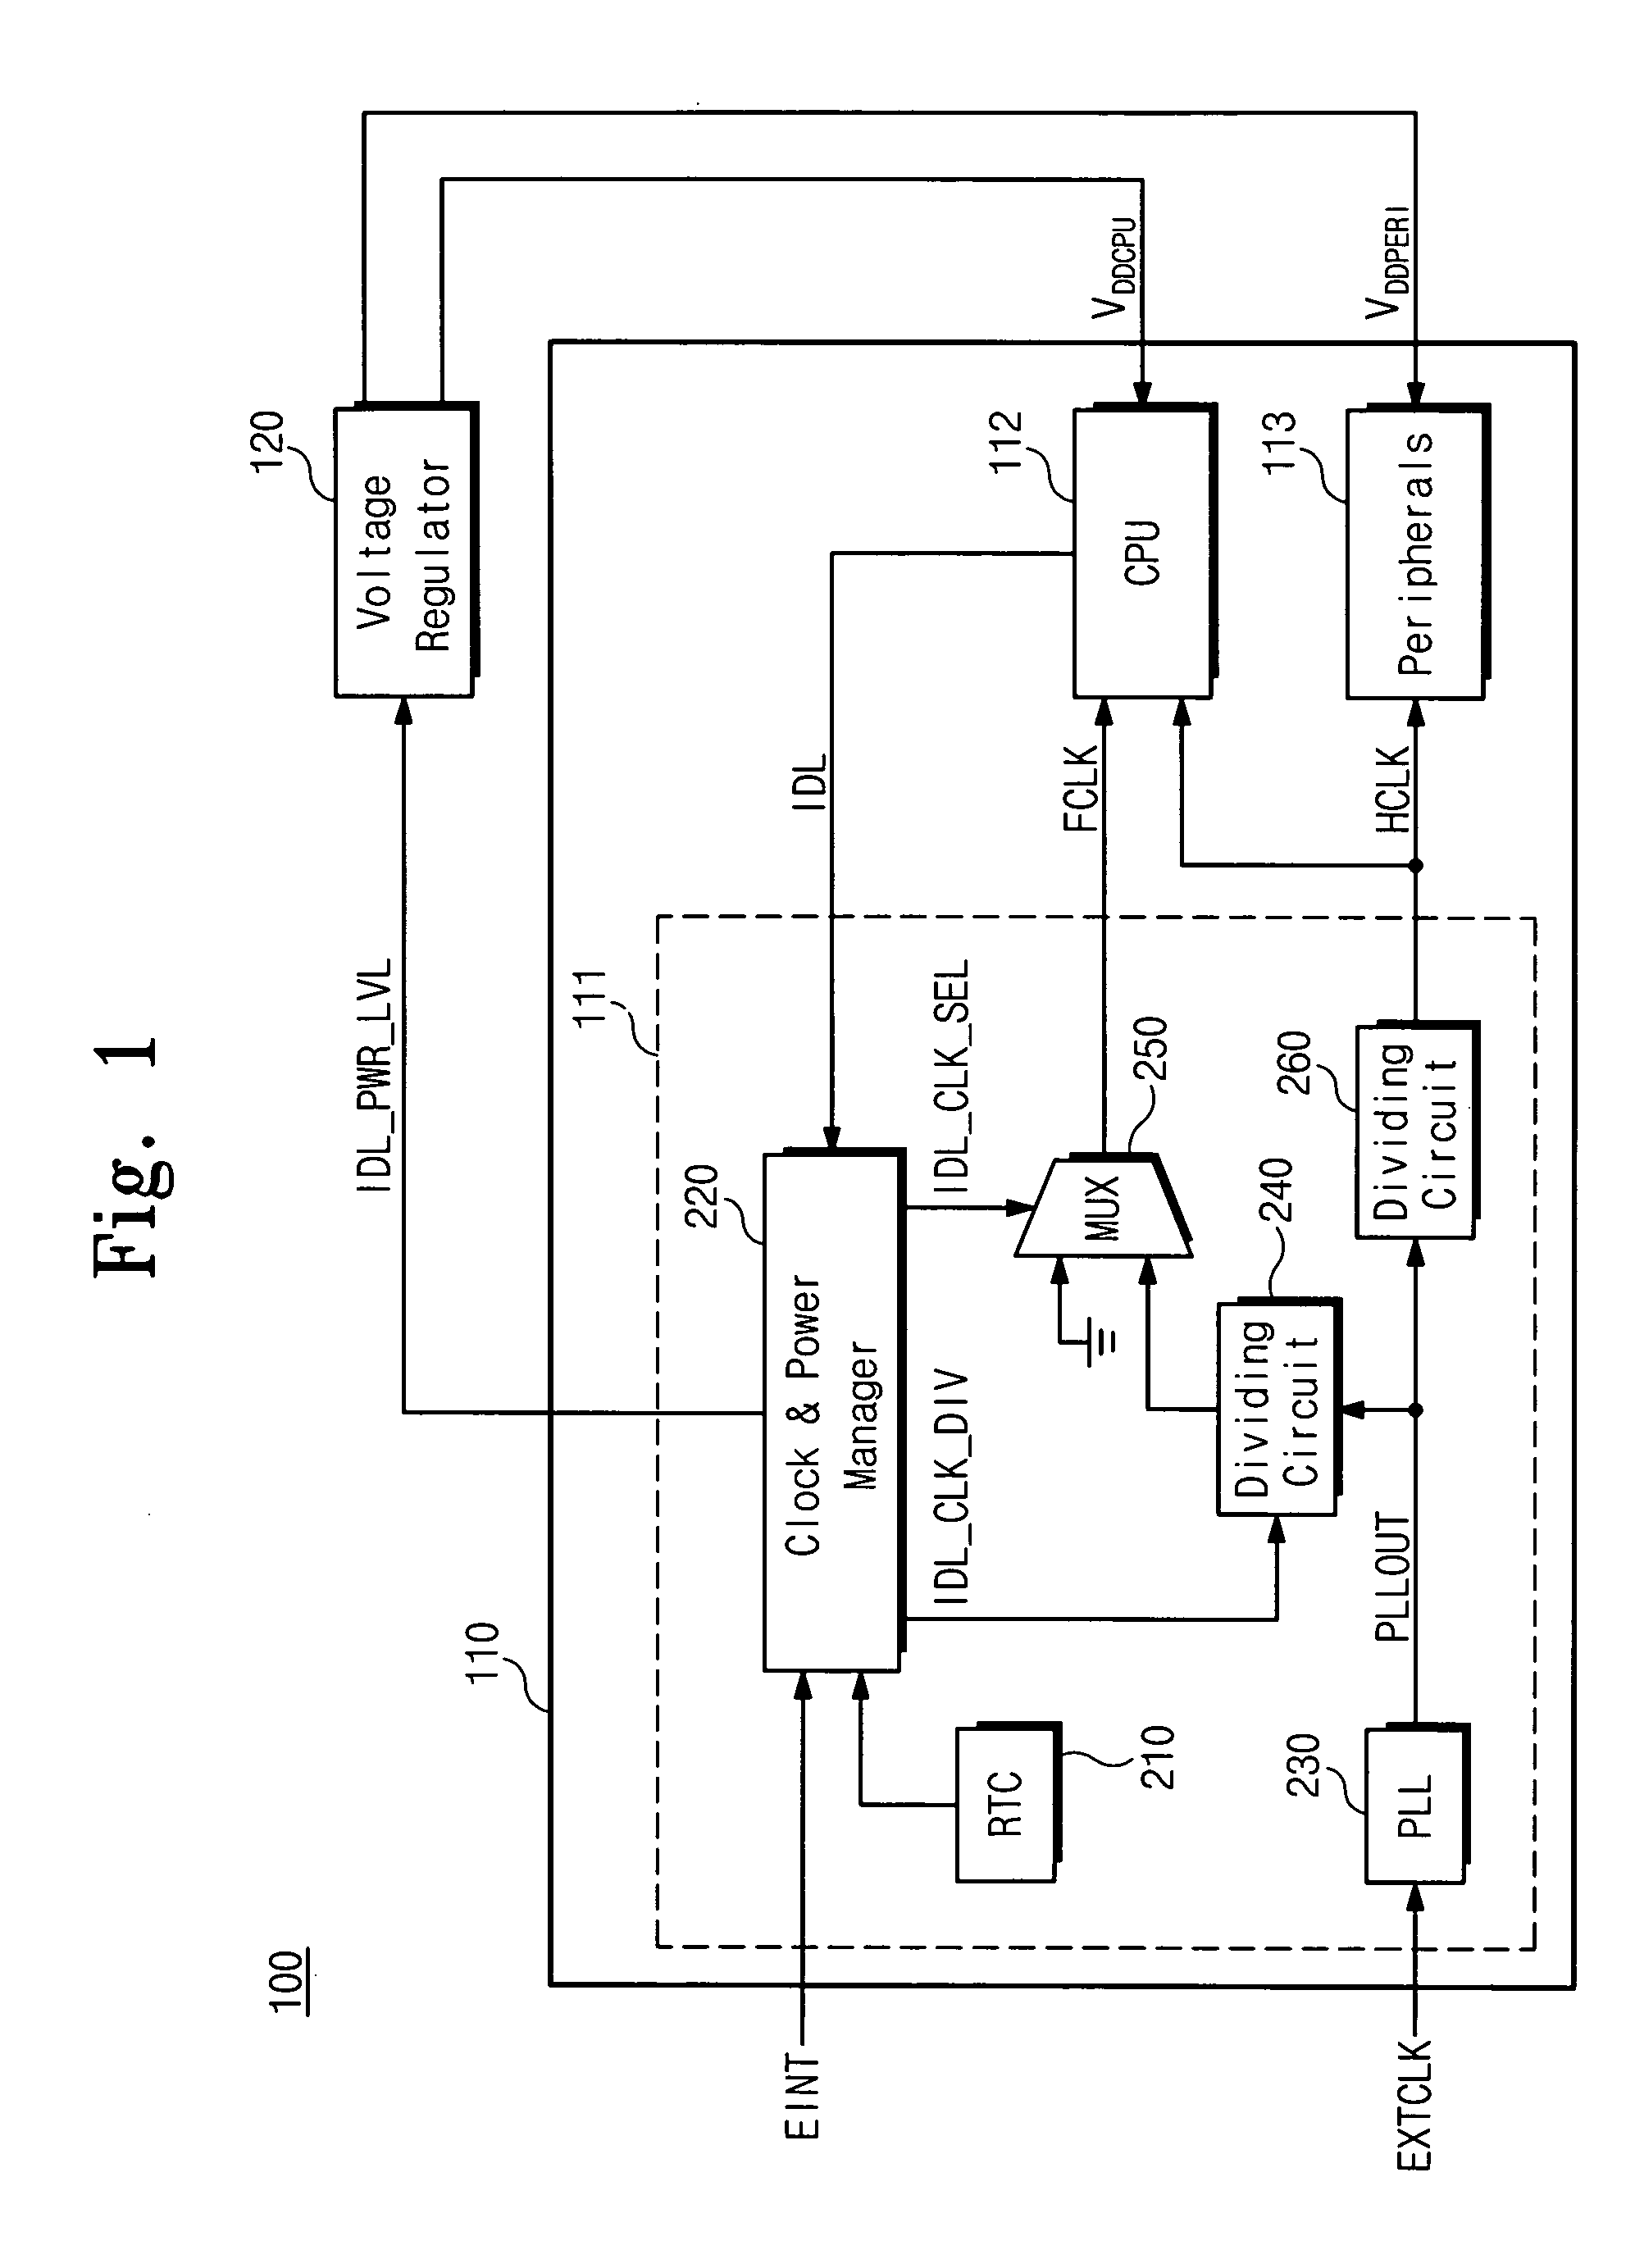 Processor system and method for reducing power consumption in idle mode